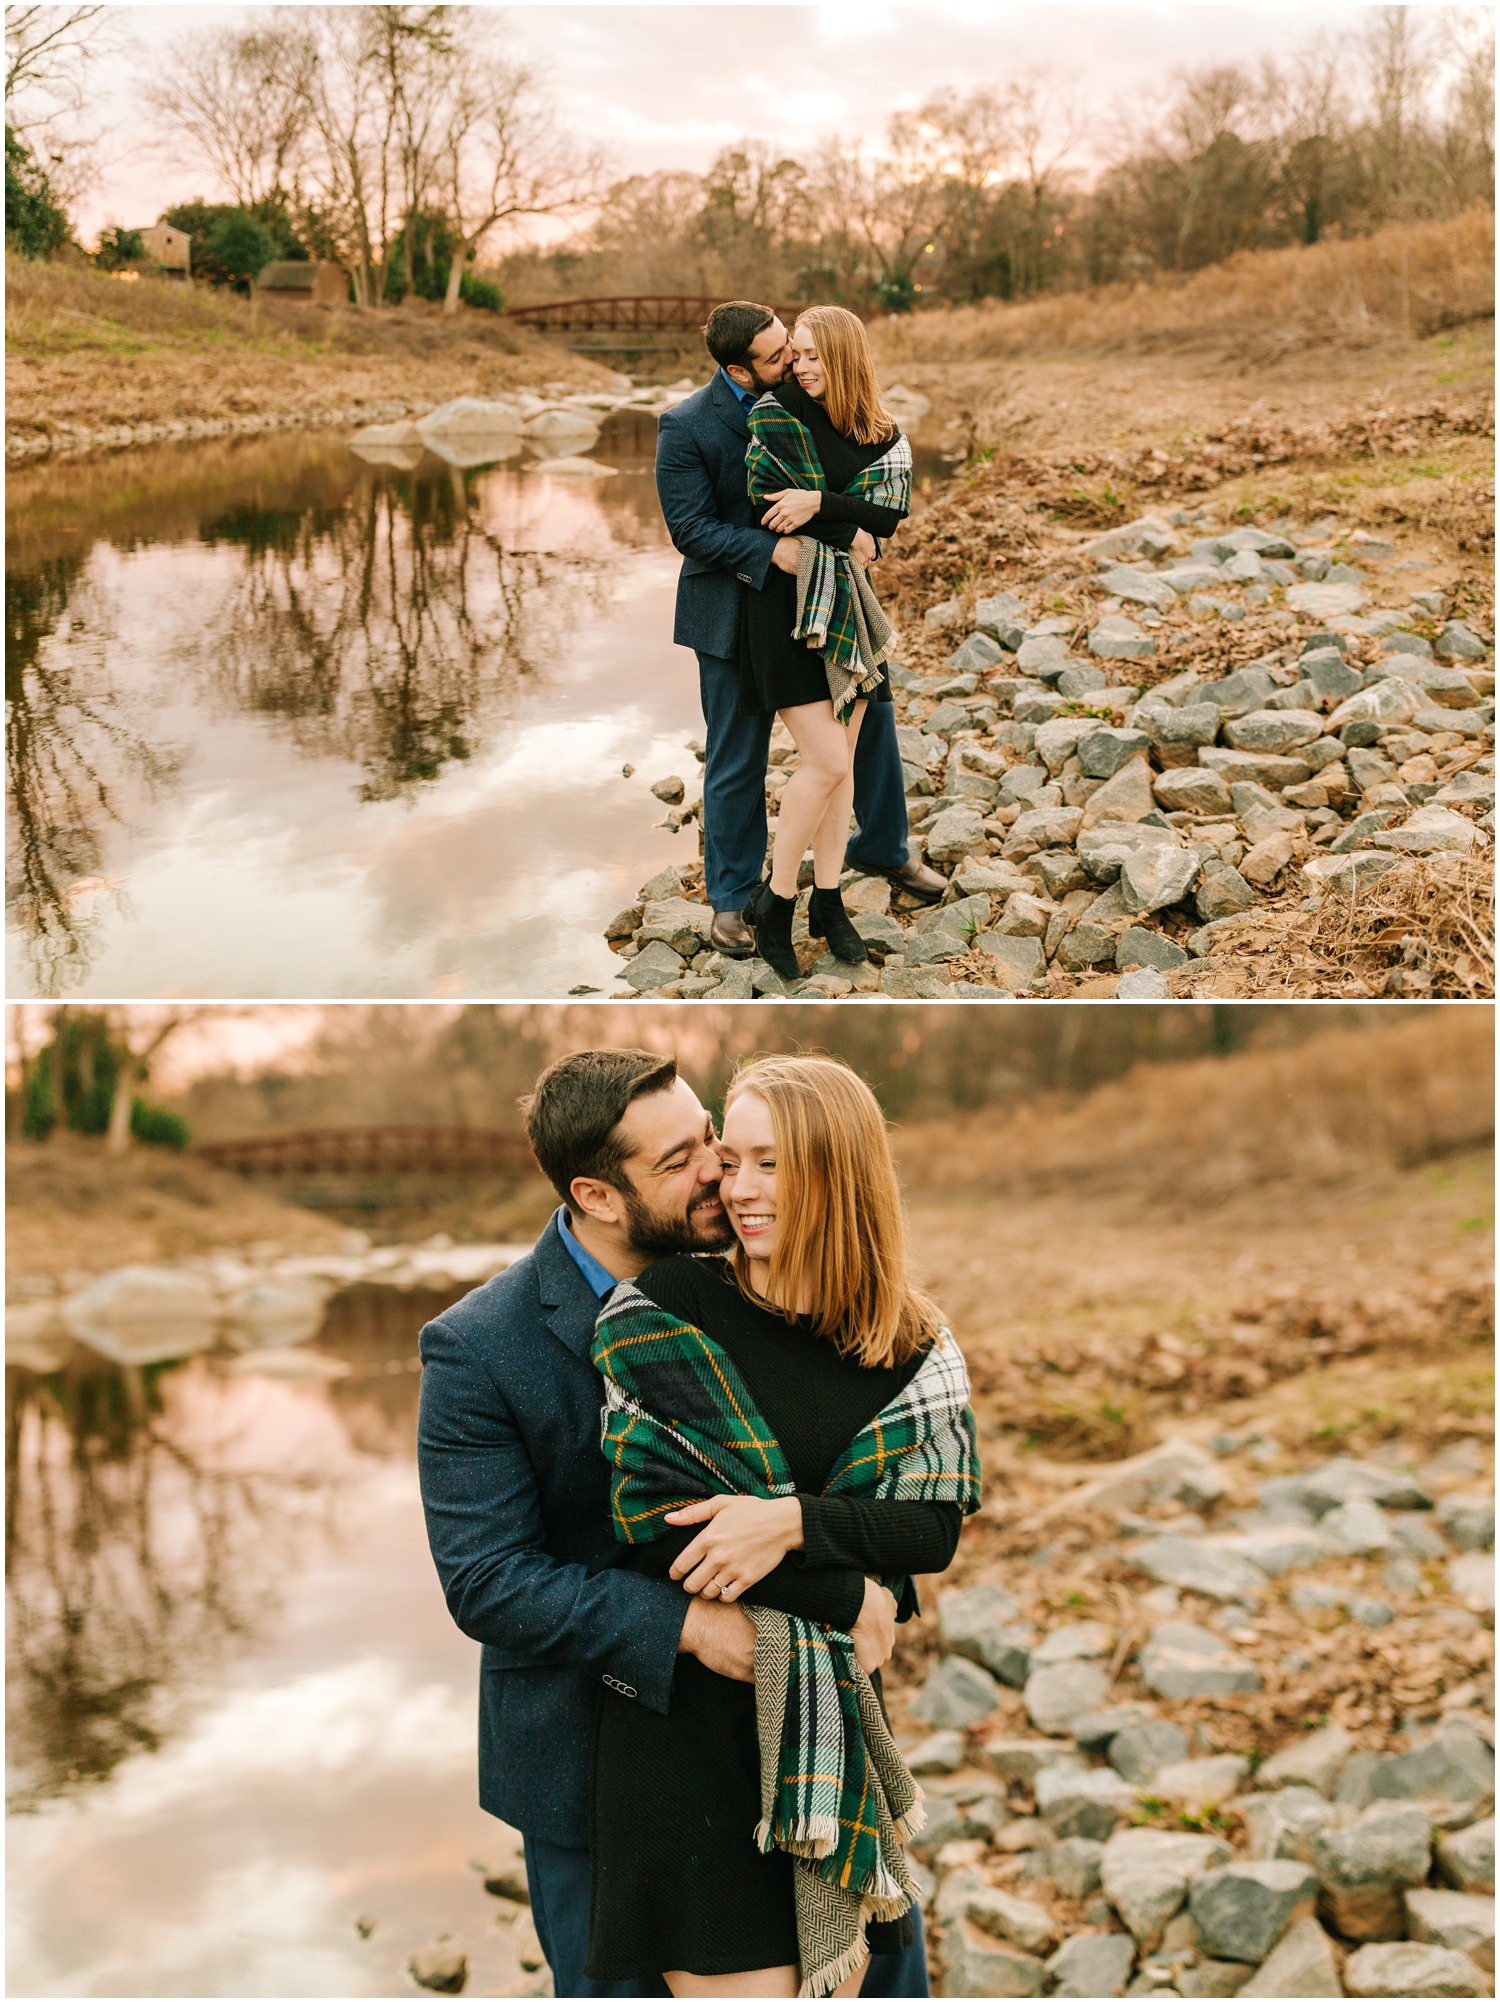 Winter Engagement session in Charlotte North Carolina with bride in green wrap